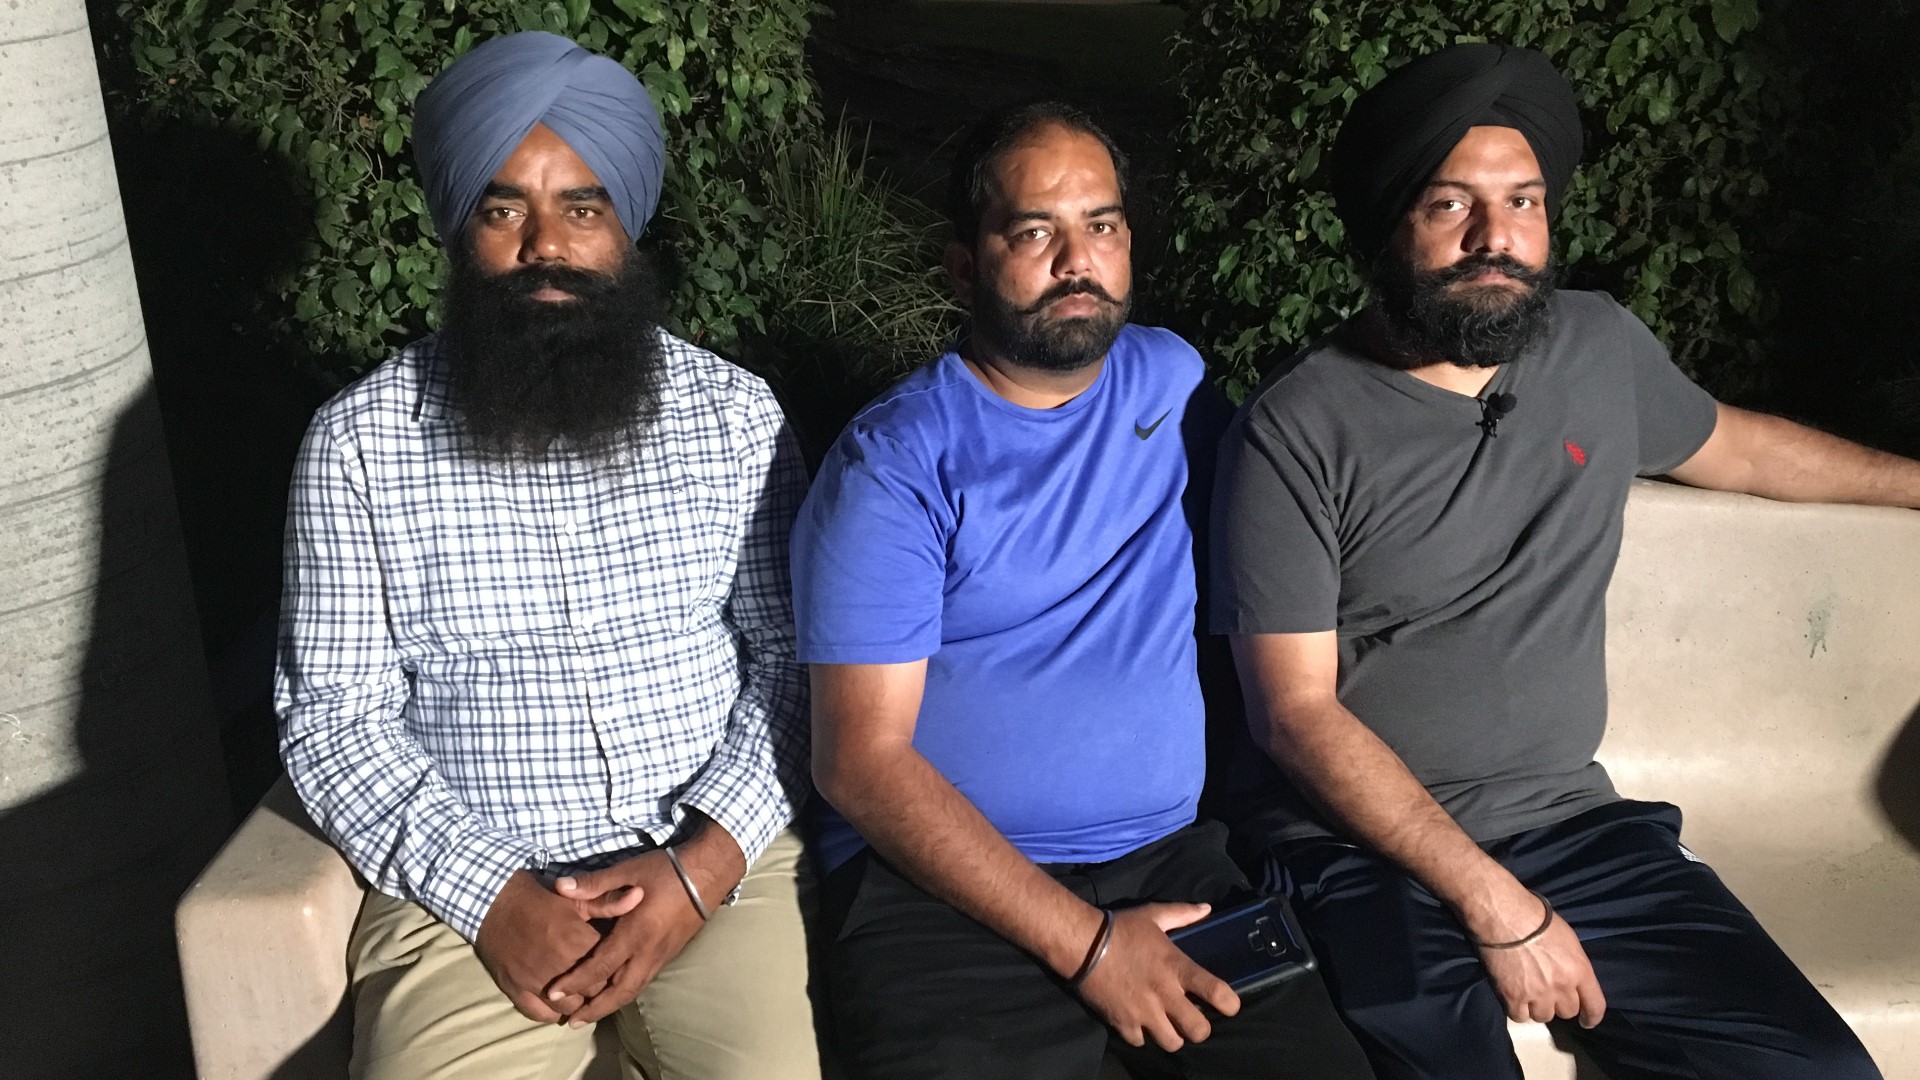 The last several days have taken a toll on Harnek Singh Kang, the son-in-law of Parmijit Singh. It was just a week ago when his father-in-law was brutally murdered at Gretchen Talley Park.